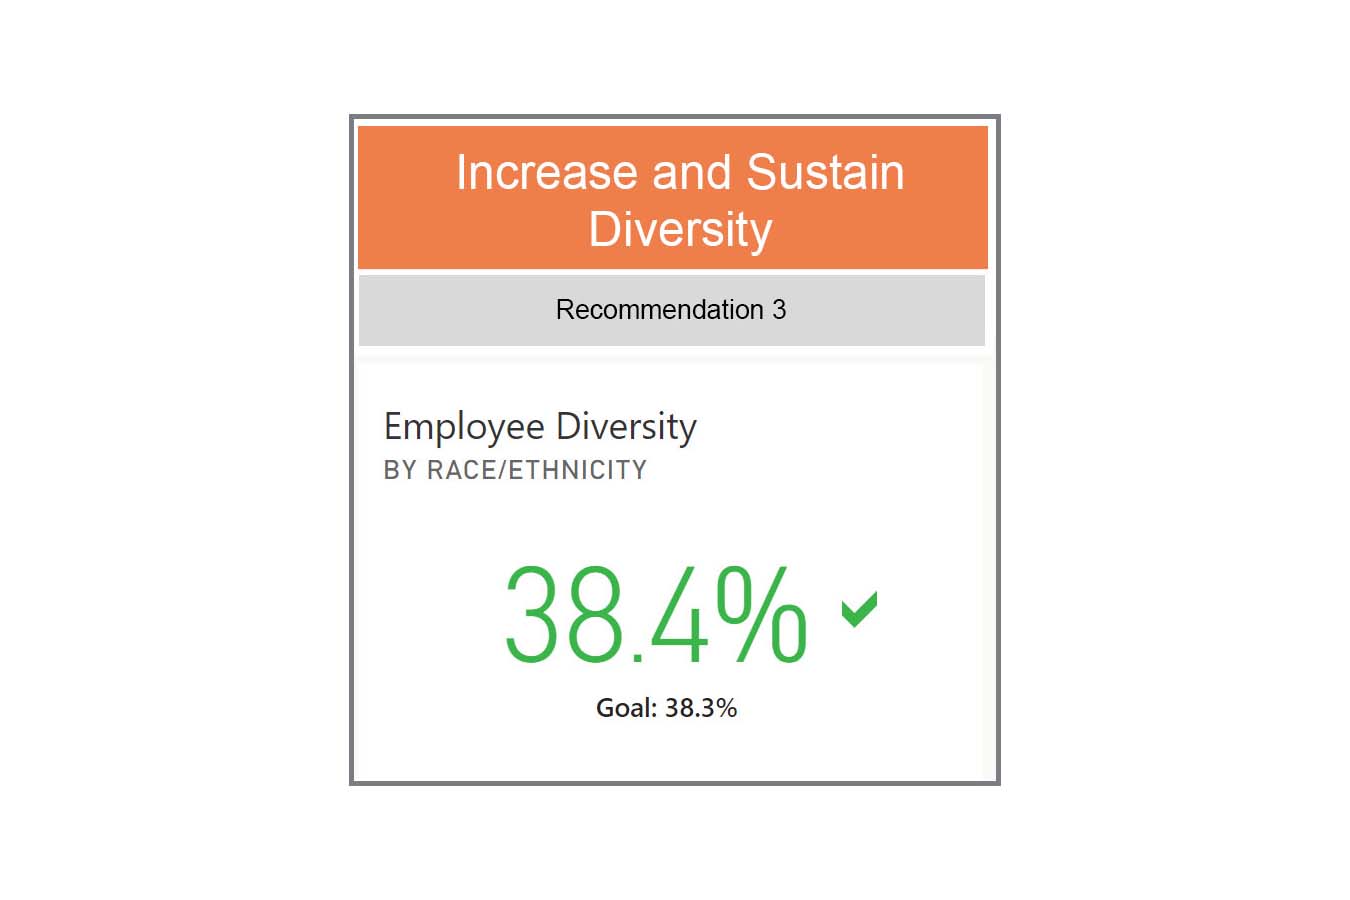 Increase and Sustain Diversity recommendation 3 graphic